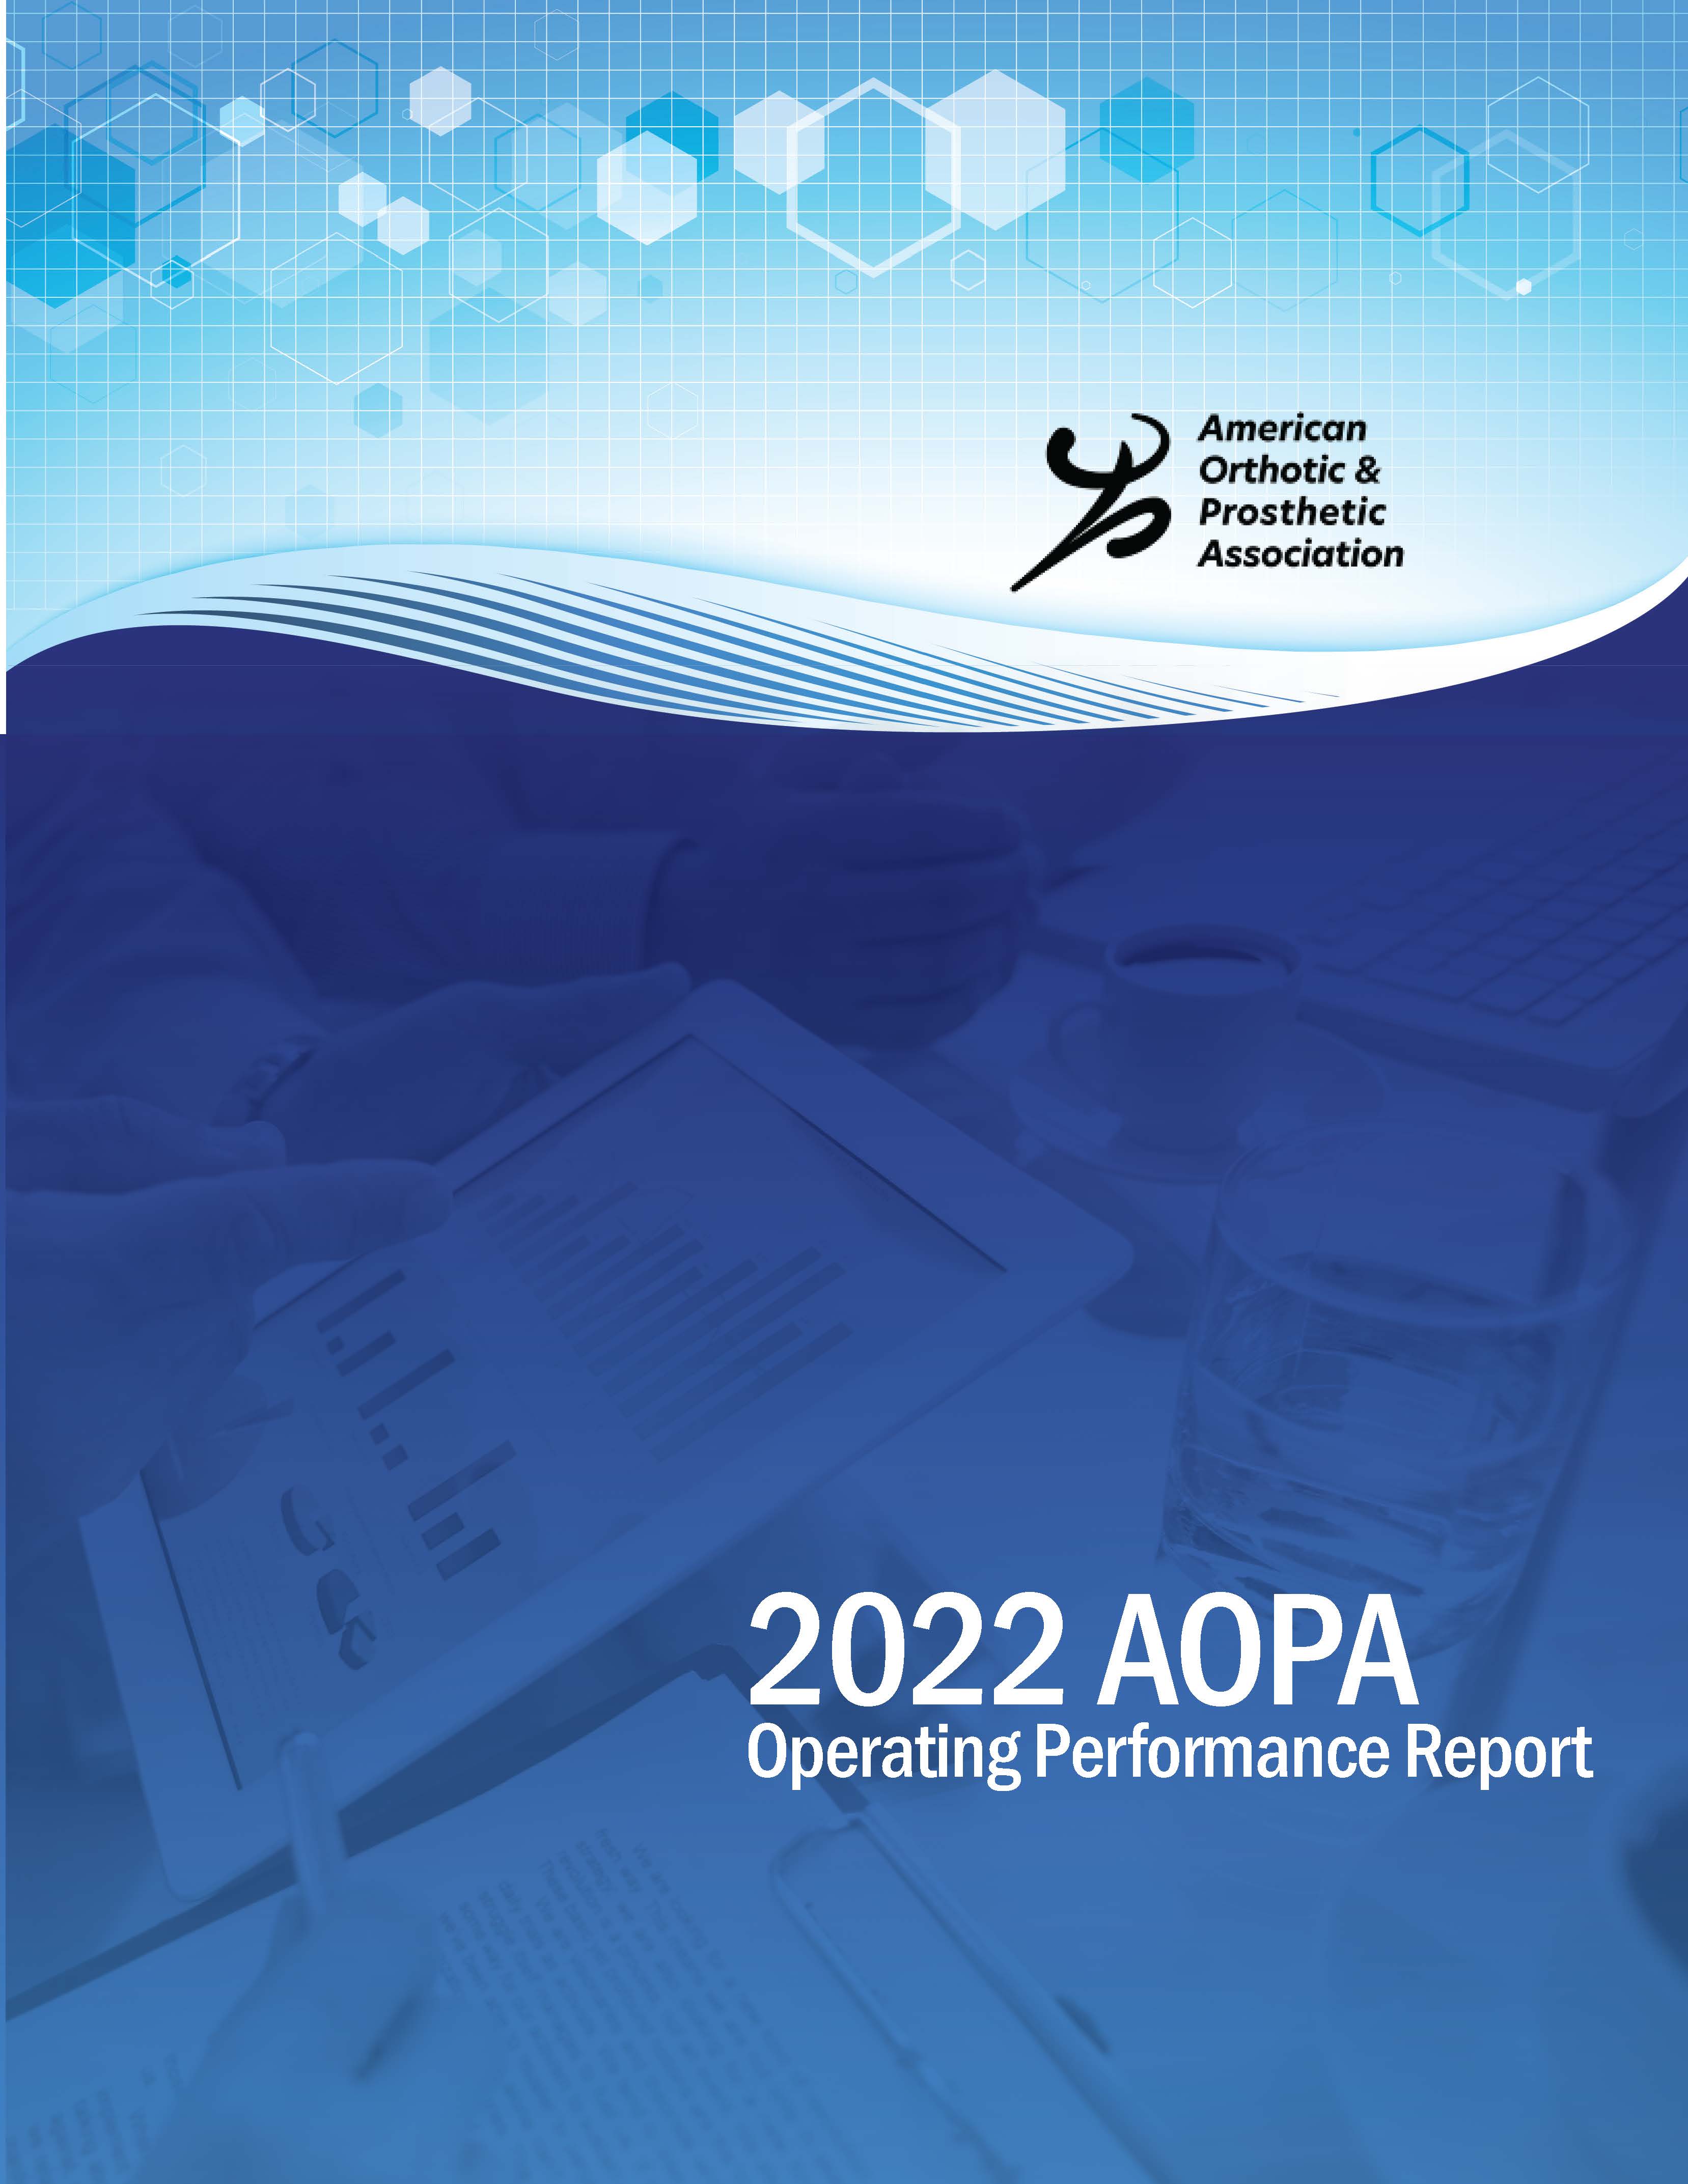 2022 AOPA Operating Performance Report